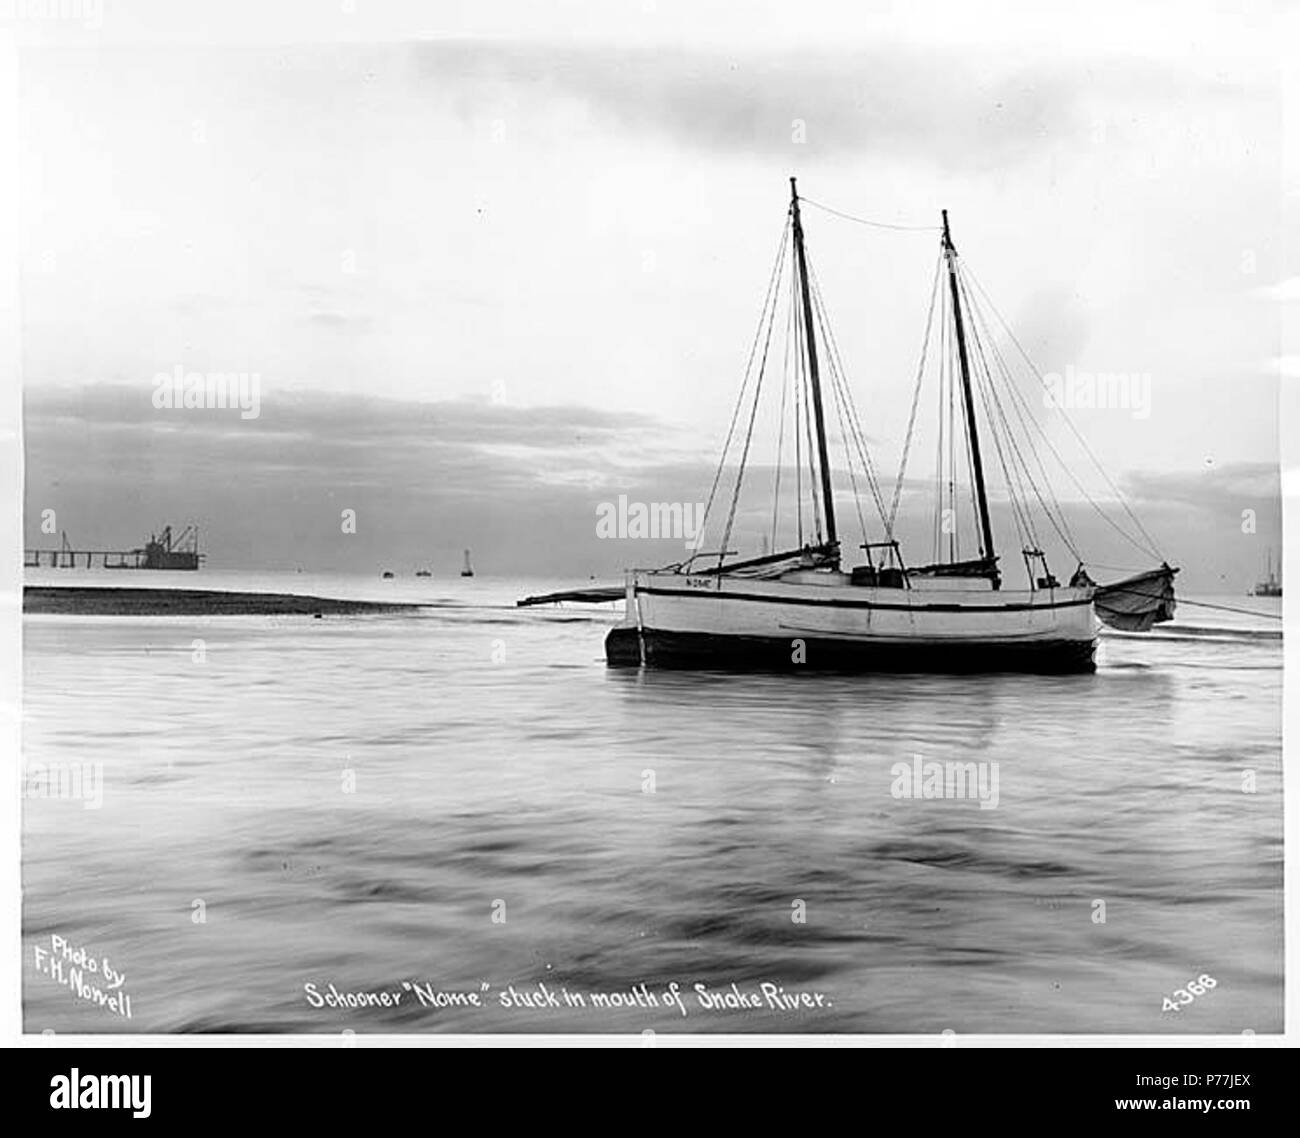 . English: Schooner NOME aground at the mouth of Snake River, Alaska, ca. 1904 . English: Caption on image: Schooner Nome stuck in mouth of Snake River. Photo by F.H. Nowell, 4366 Subjects (LCTGM): Ship accidents--Alaska--Snake River; Rivers--Alaska Subjects (LCSH): Nome (Schooner); Snake River (Alaska)  . circa 1904 11 Schooner NOME aground at the mouth of Snake River, Alaska, ca 1904 (NOWELL 143) Stock Photo